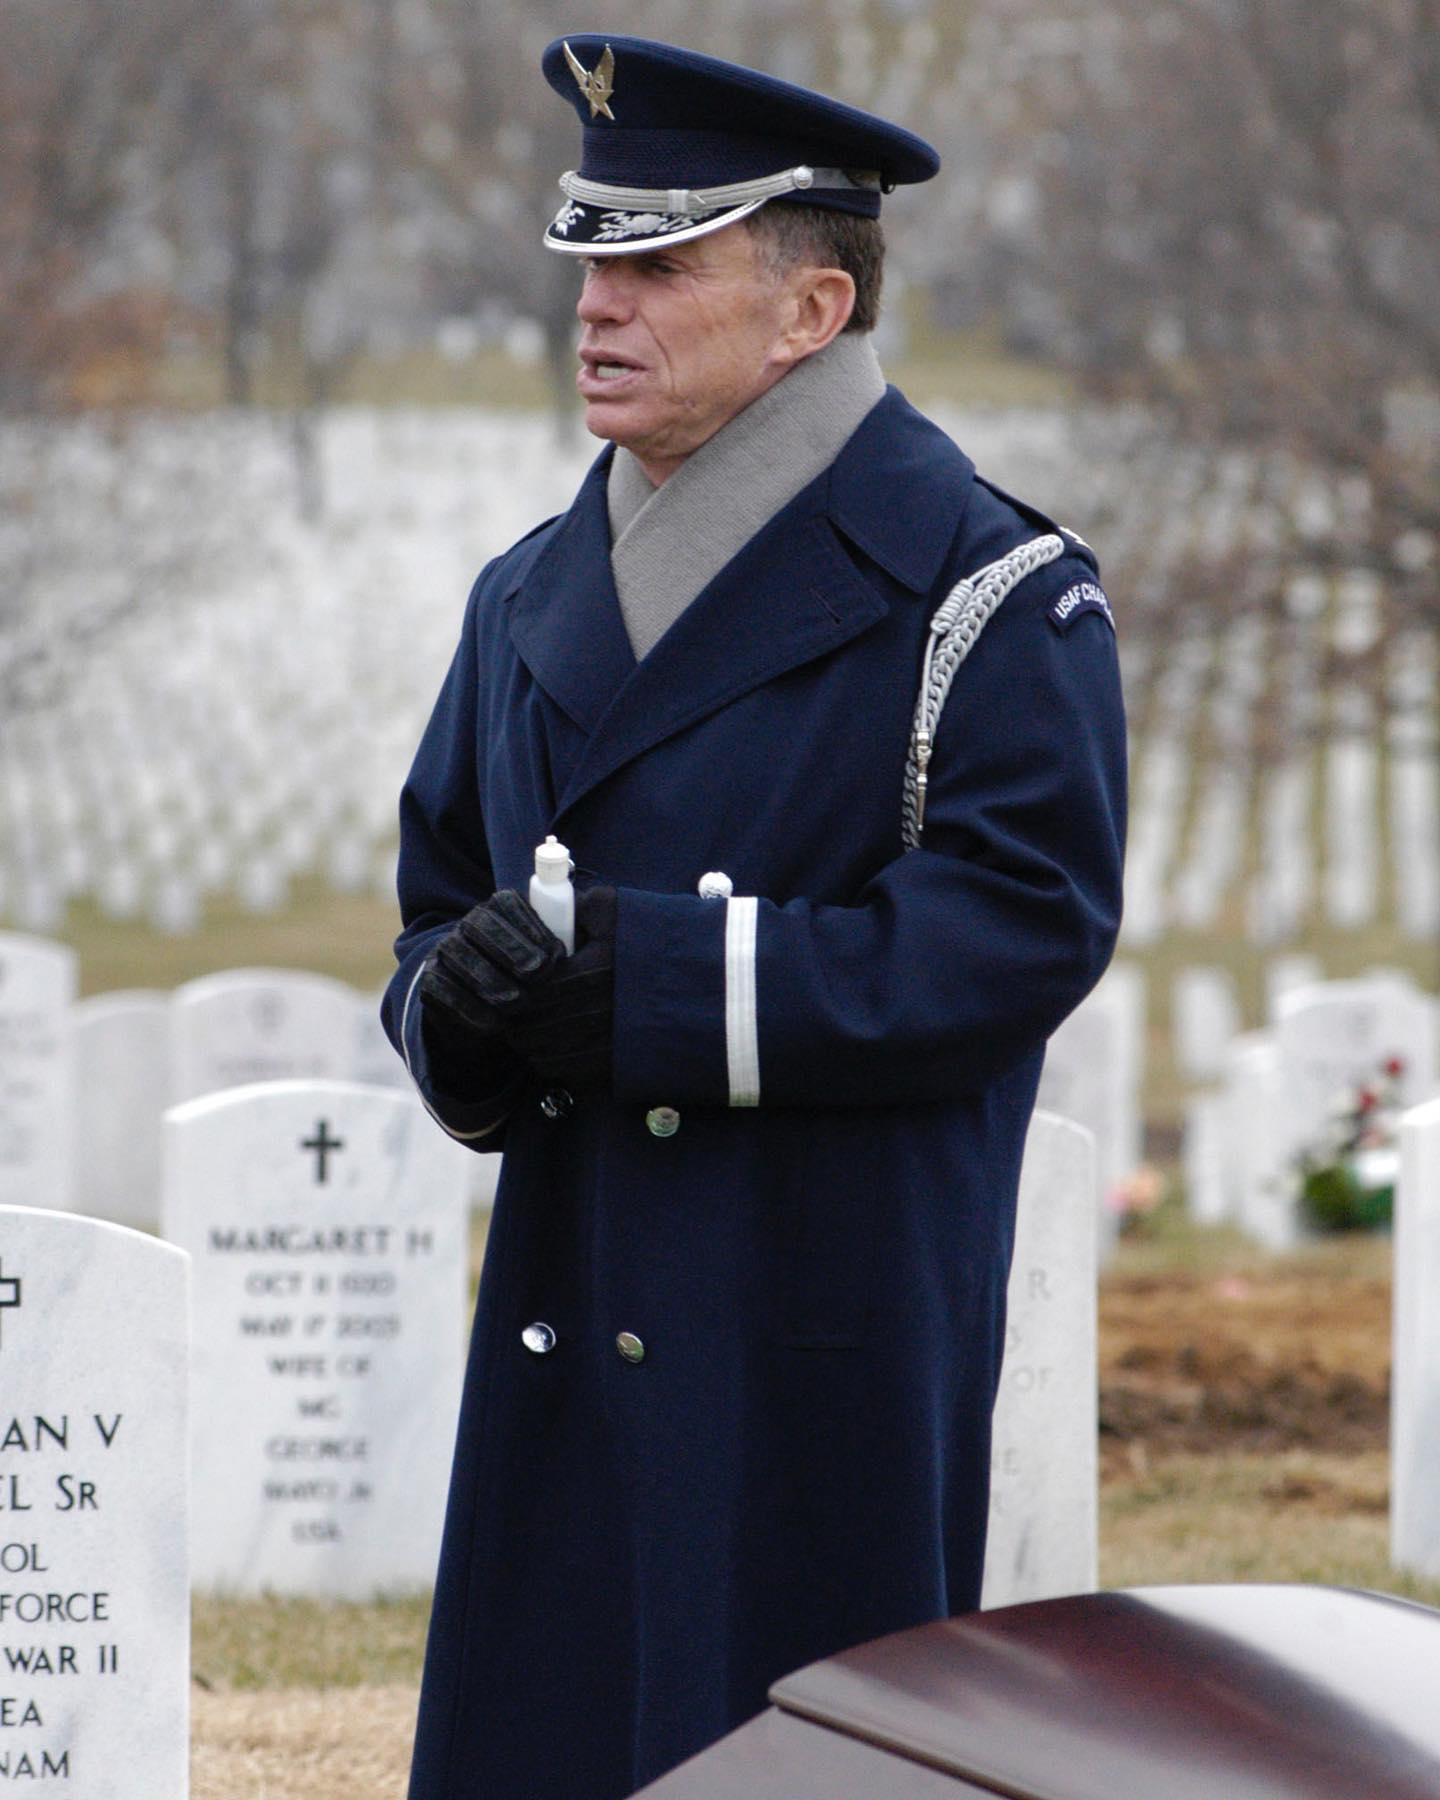 United States Air Force Chaplain (Colonel) Martin McGuill's (Ret.) last Arlington National Cemetery service was September 25th at 9 AM. This photo was from the first service I did with Father McGuill in 2003, he had already been at the cemetery for decades (he'd like to say since before Moses' beard grew long). On each of the hundreds of services we were on together, I watched as he was able to connect with each family in a compassionate and meaningful way. He would often quote St. Francis of Assisi, "Preach the Gospel, when necessary, use words.” Or close a service by saying, "May your love, sore on eagles wings to touch the face of God, hallelujah, hallelujah." And, he would tell his groaners. 

He touched the lives of so many families in their time of need and he touched the lives of the people that worked with him. We are all better for having spent time with him, especially in the few minutes before a service would start when he would just chat with you for a moment. I know I will miss those times.

Here's one more of his quotes, "There are a lot of tragic funerals at Arlington, but this service is different, it is a big T for triumph." 

Off he goes into the wild blue yonder, Climbing high into the sun... Thank you Father McGuill!

@usairforce 
@official_usafhonorguard 
@AirForceChaplainCorps